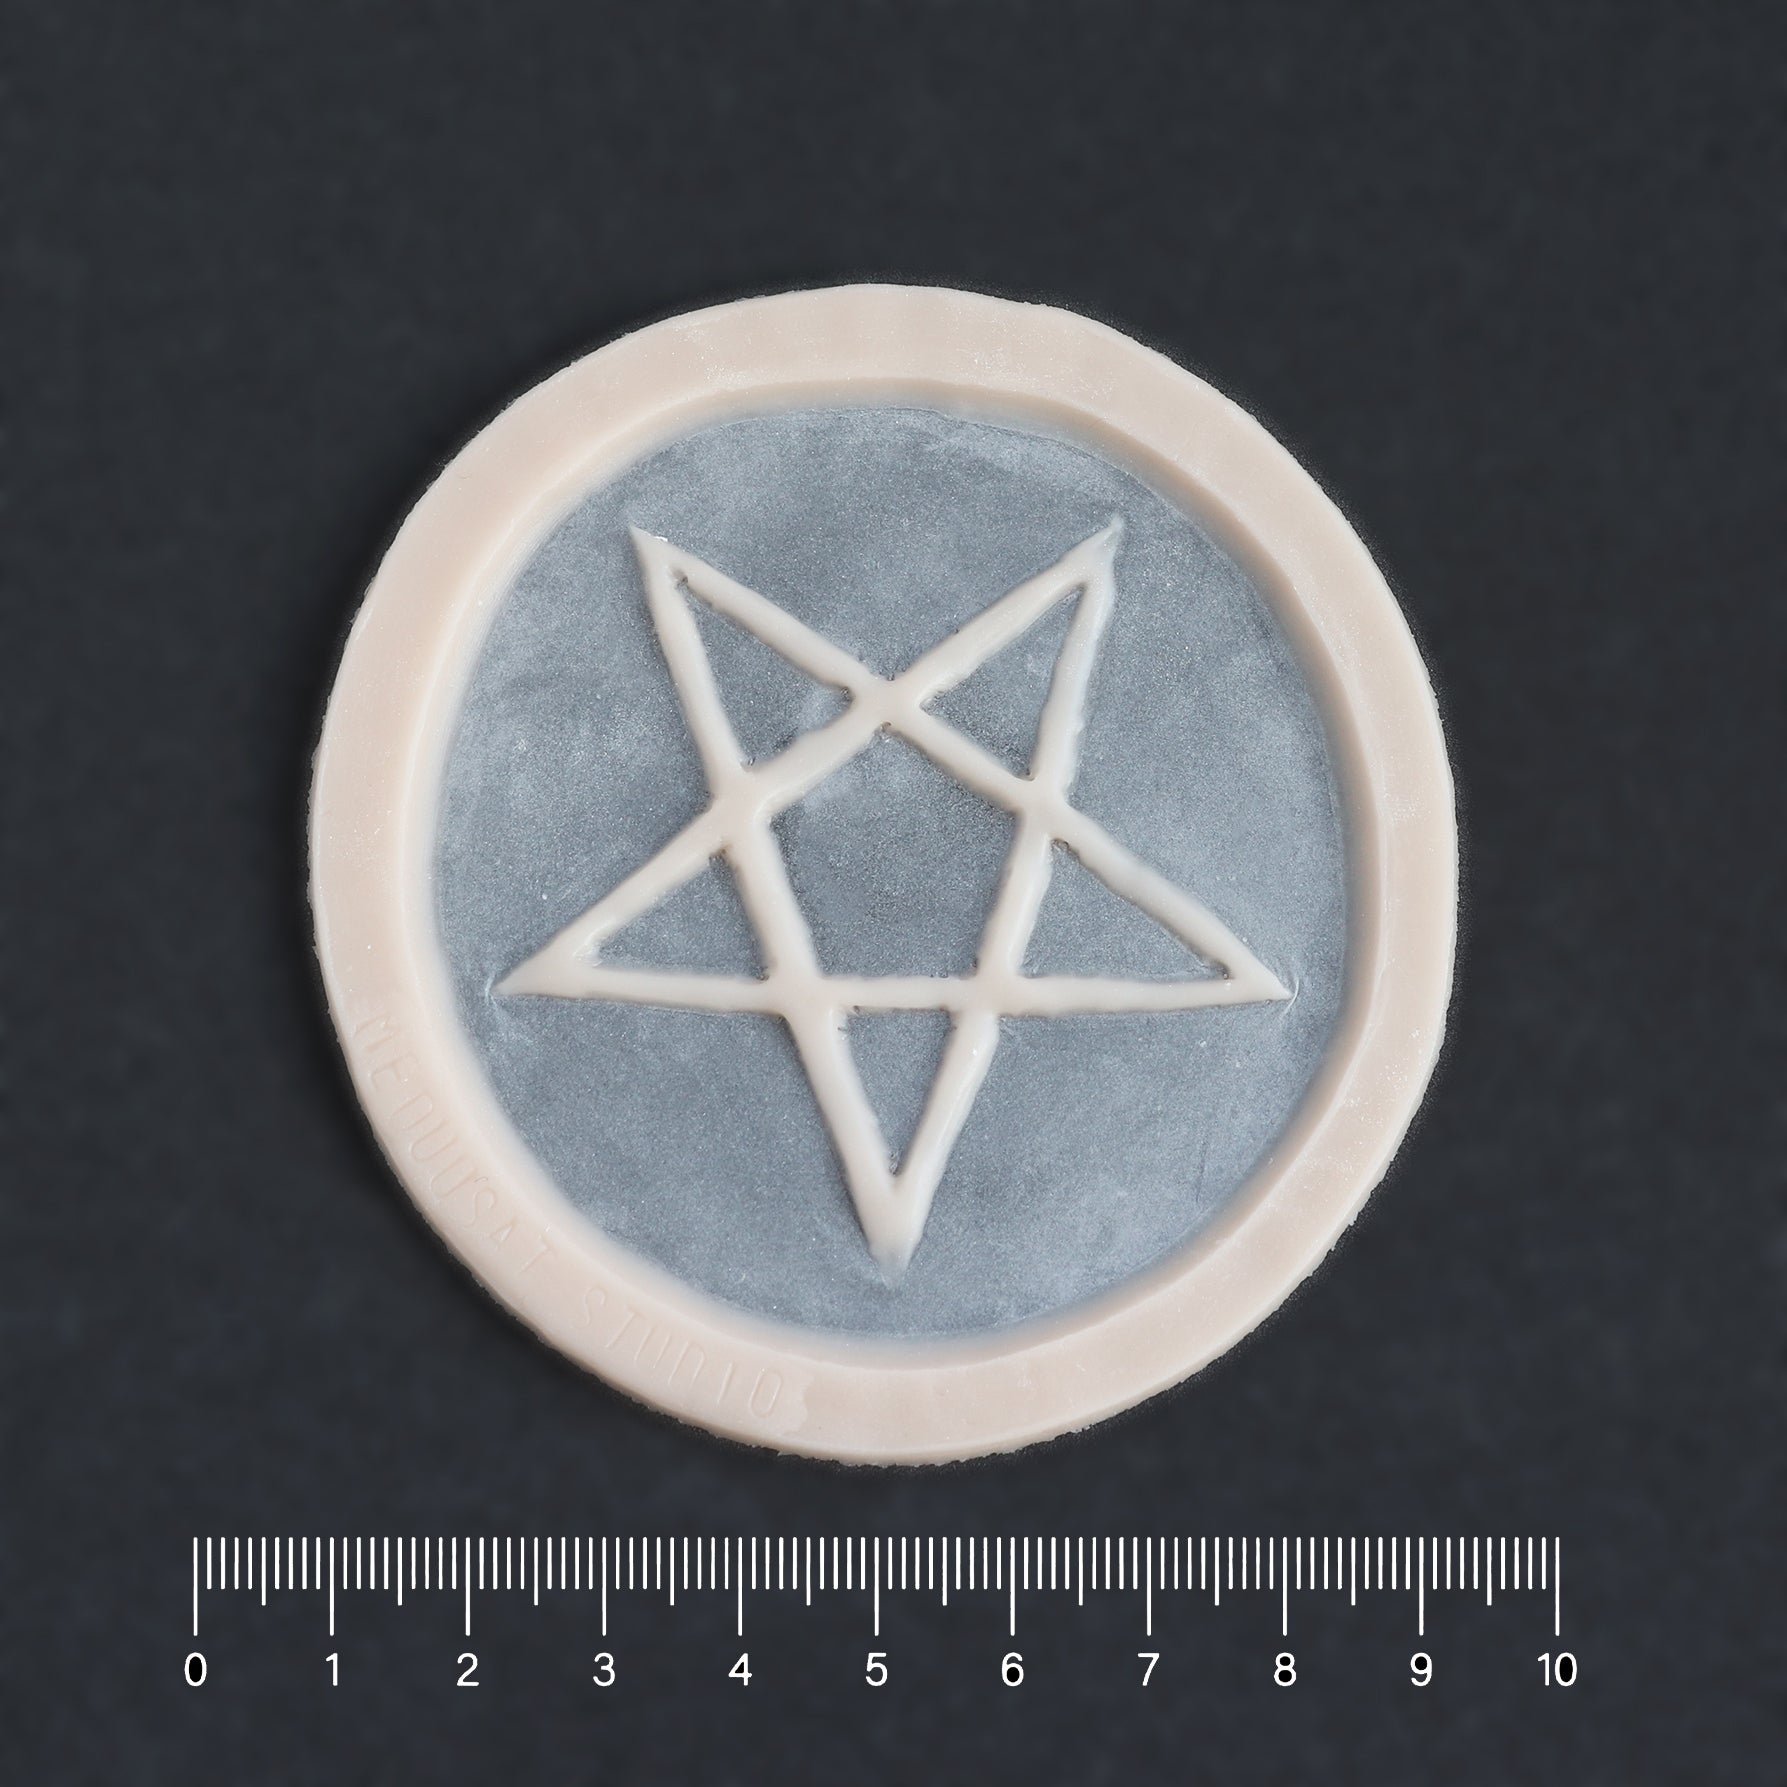 Pentagram Scarification - Silicone makeup prosthetic in vanilla shade on a black surface with a ruler